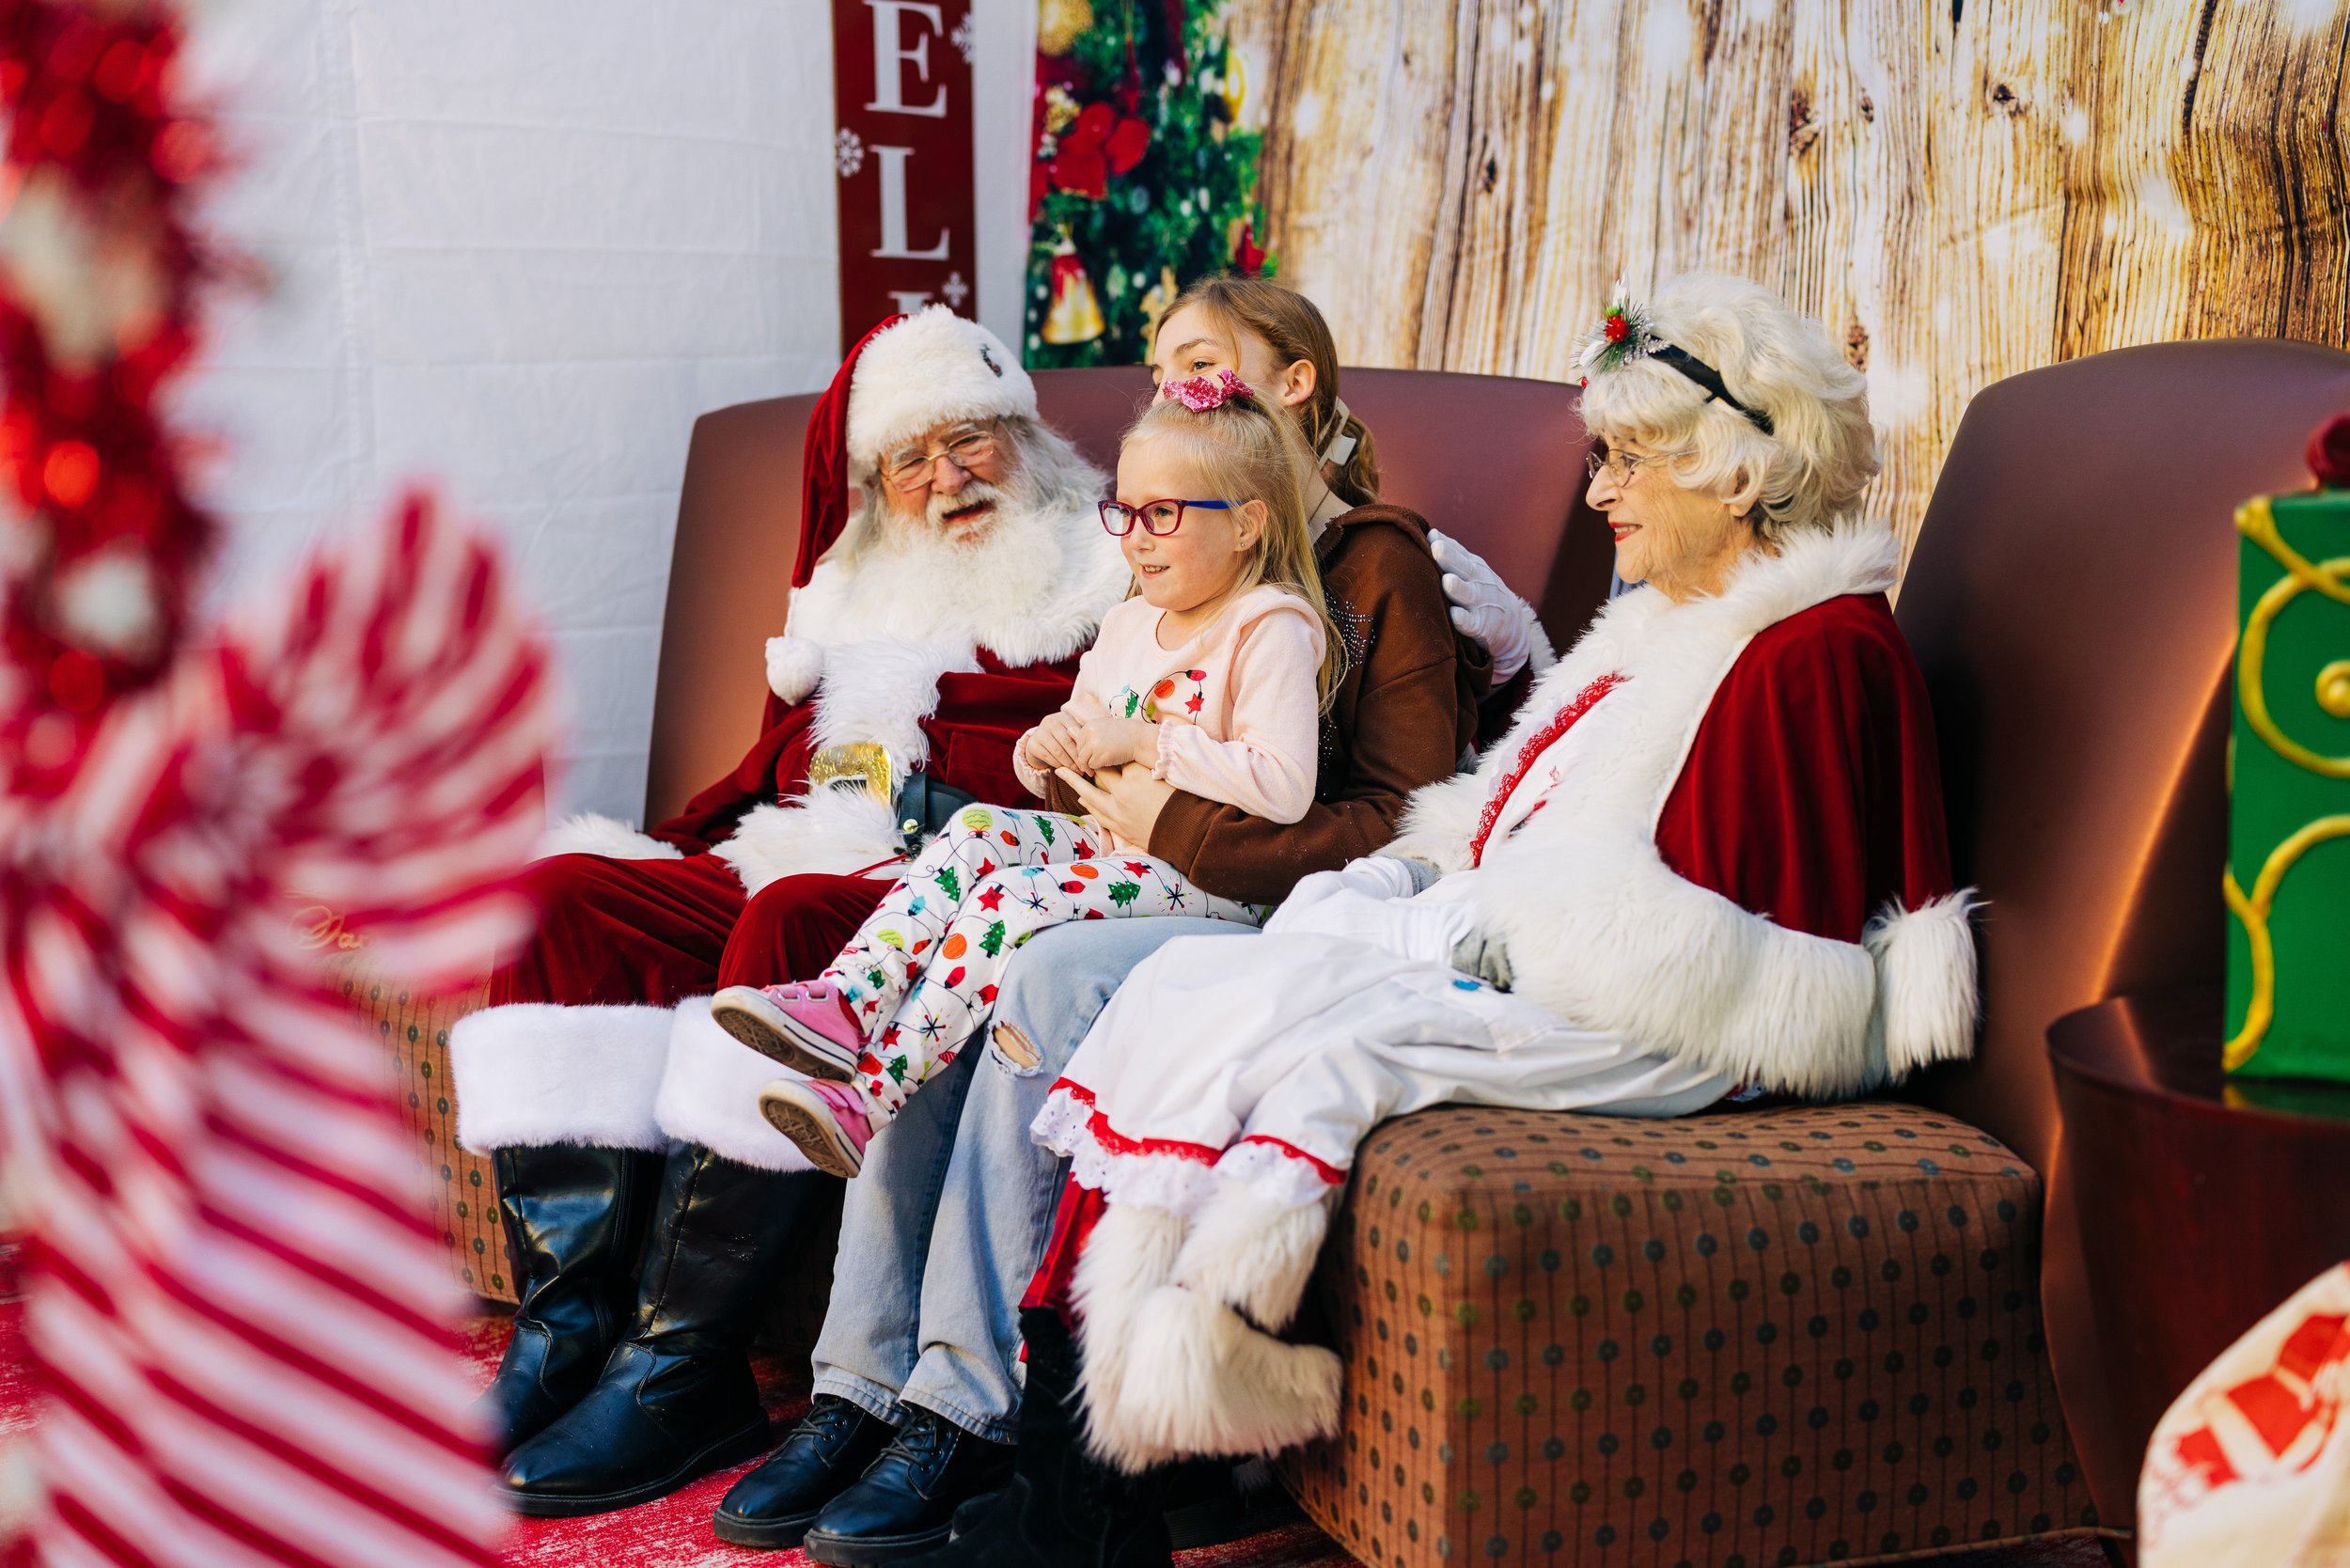 Child poses with Santa and Mrs. Claus